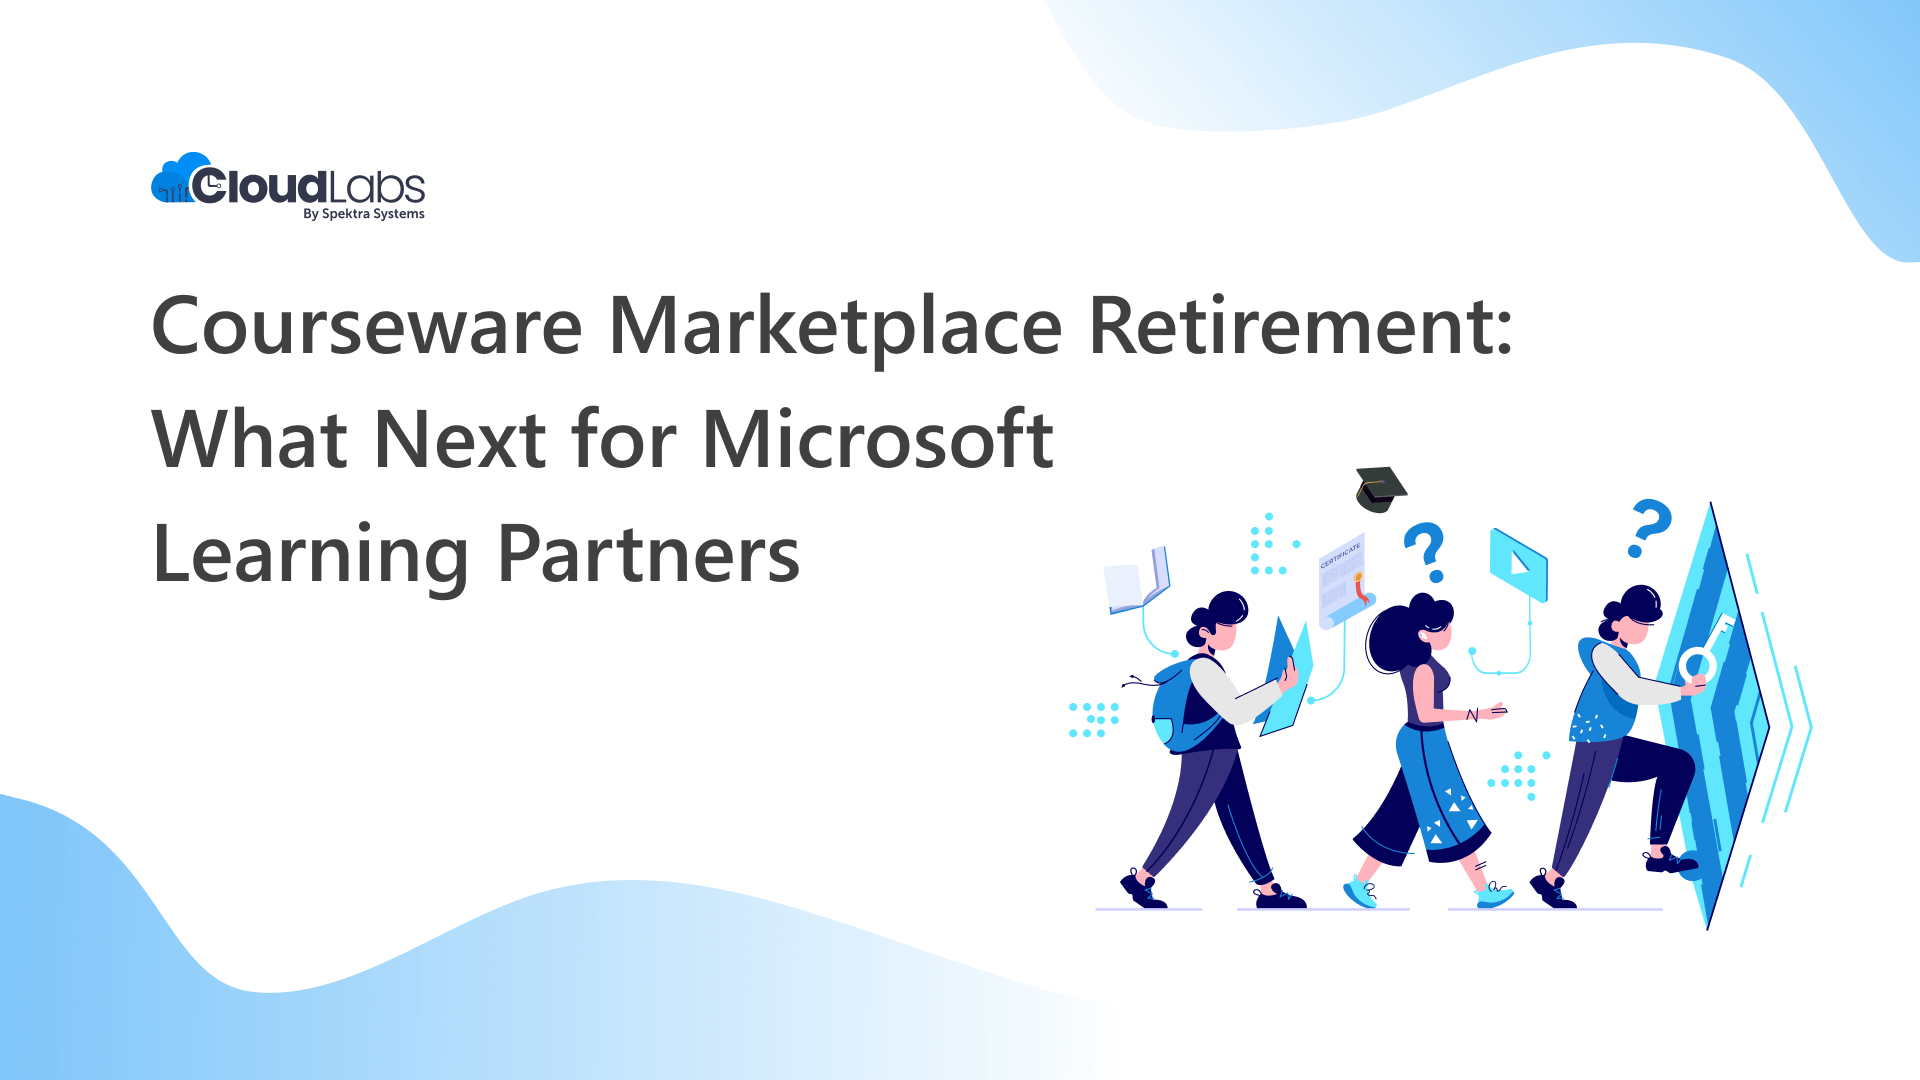 Courseware Marketplace Retirement: Whats the next big leap for Microsoft Learning Partners